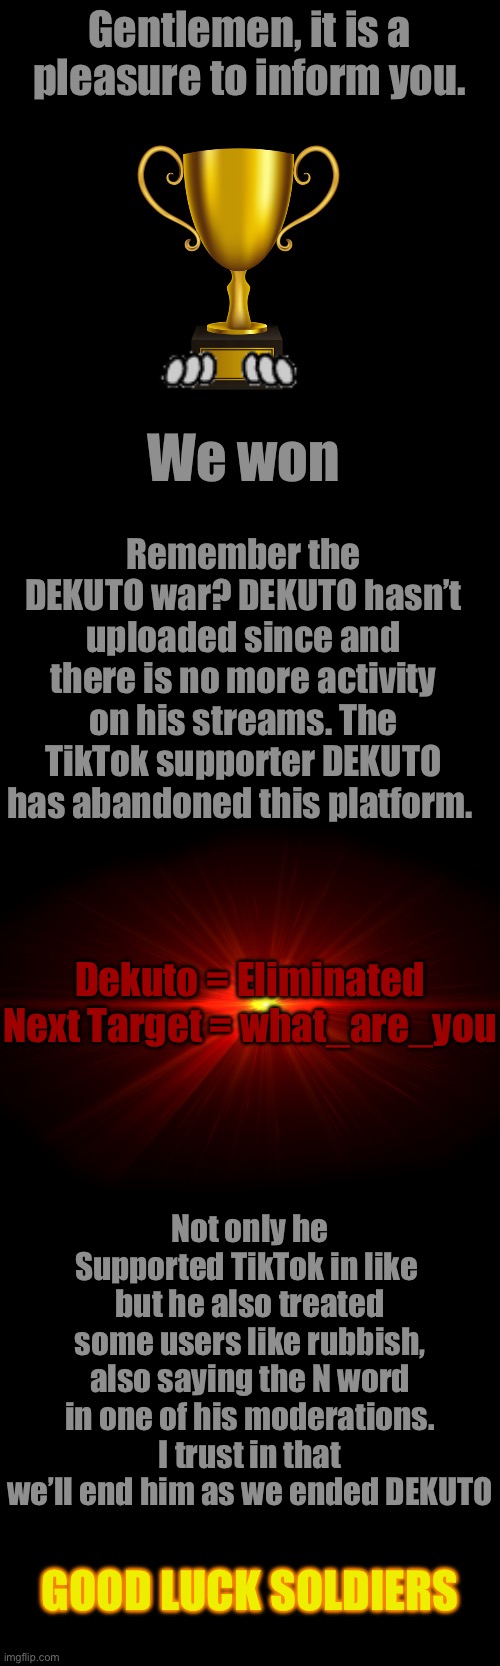 Gentlemen, it is a pleasure to inform you. We won; Remember the DEKUTO war? DEKUTO hasn’t uploaded since and there is no more activity on his streams. The TikTok supporter DEKUTO has abandoned this platform. Dekuto = Eliminated



Next Target = what_are_you; Not only he Supported TikTok in like  but he also treated some users like rubbish, also saying the N word in one of his moderations. I trust in that we’ll end him as we ended DEKUTO; GOOD LUCK SOLDIERS | made w/ Imgflip meme maker